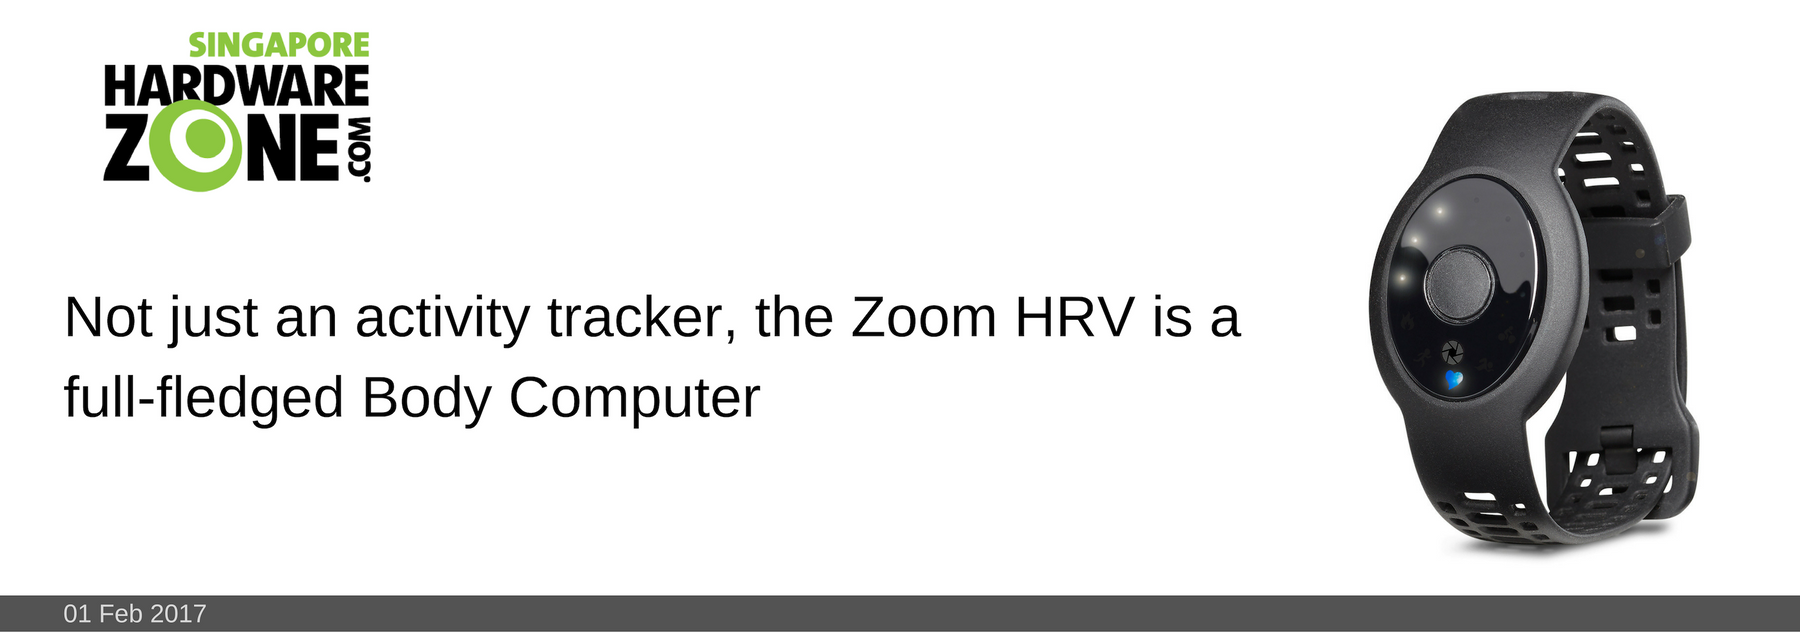 01 FEB 2017: Not just an activity tracker, the Zoom HRV is a full-fledged Body Computer